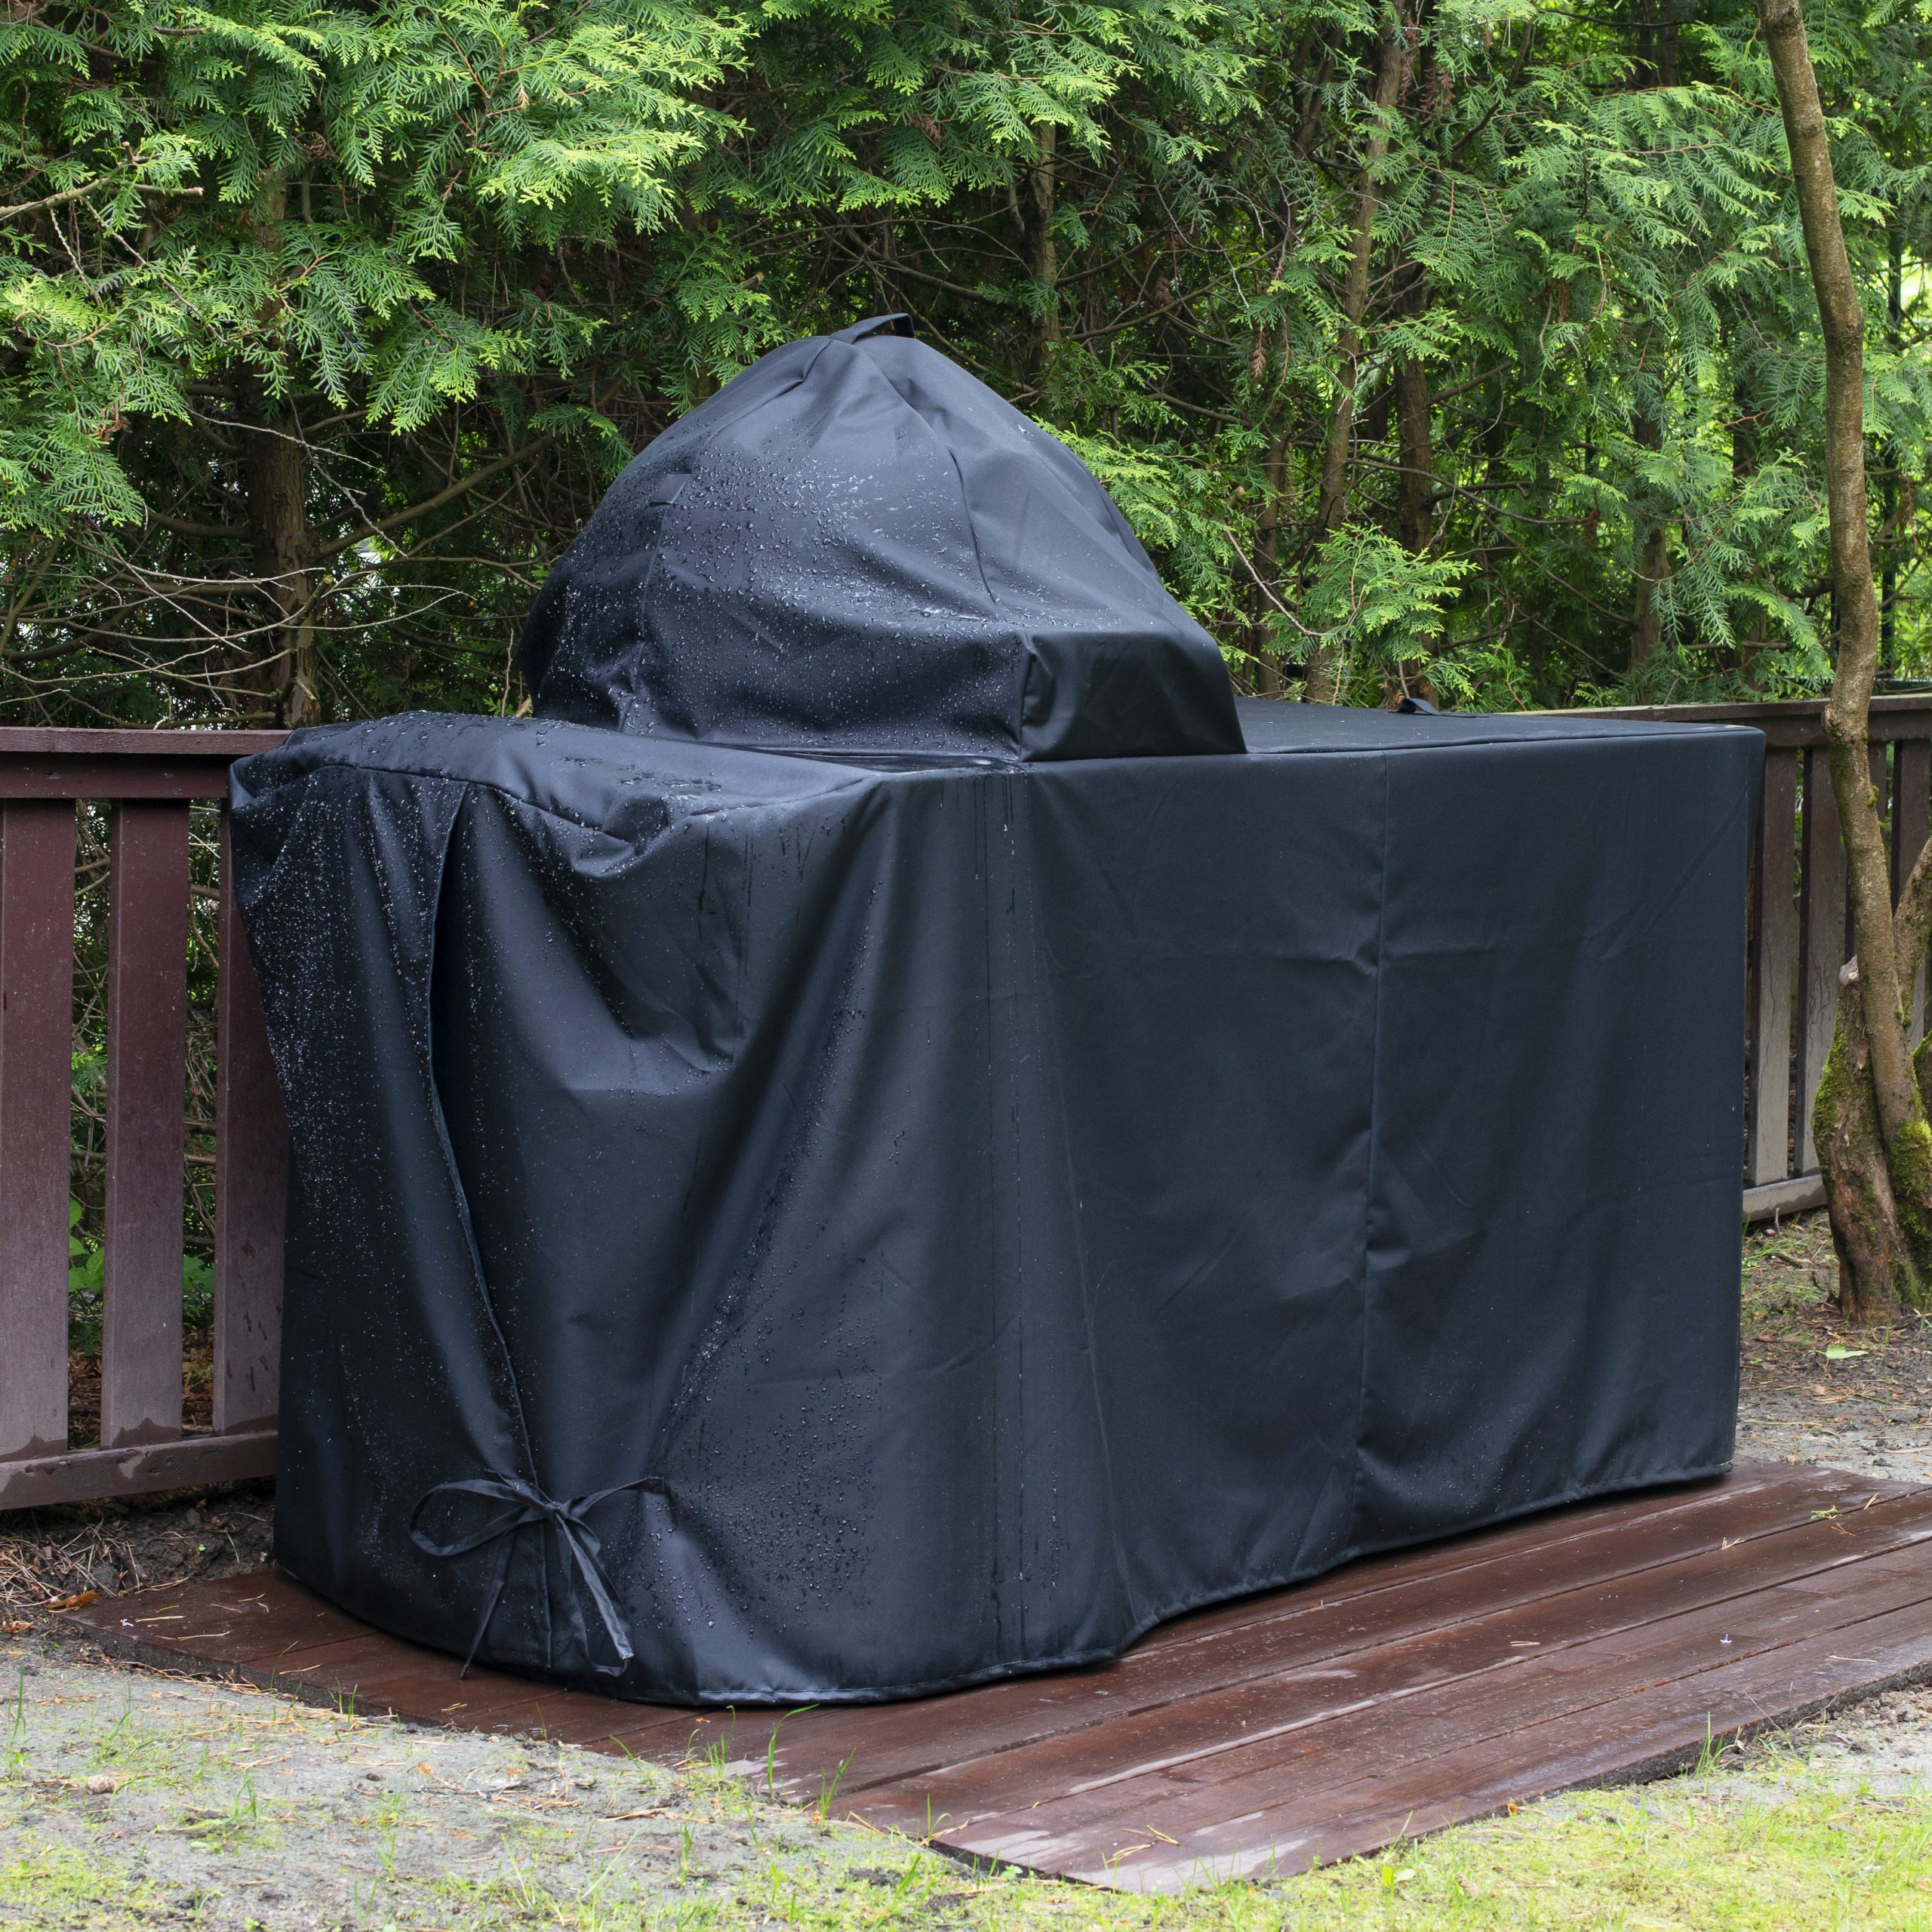 Barbecue Grill Cover Protecting Kamado Style Ceramic Grill From Rain.